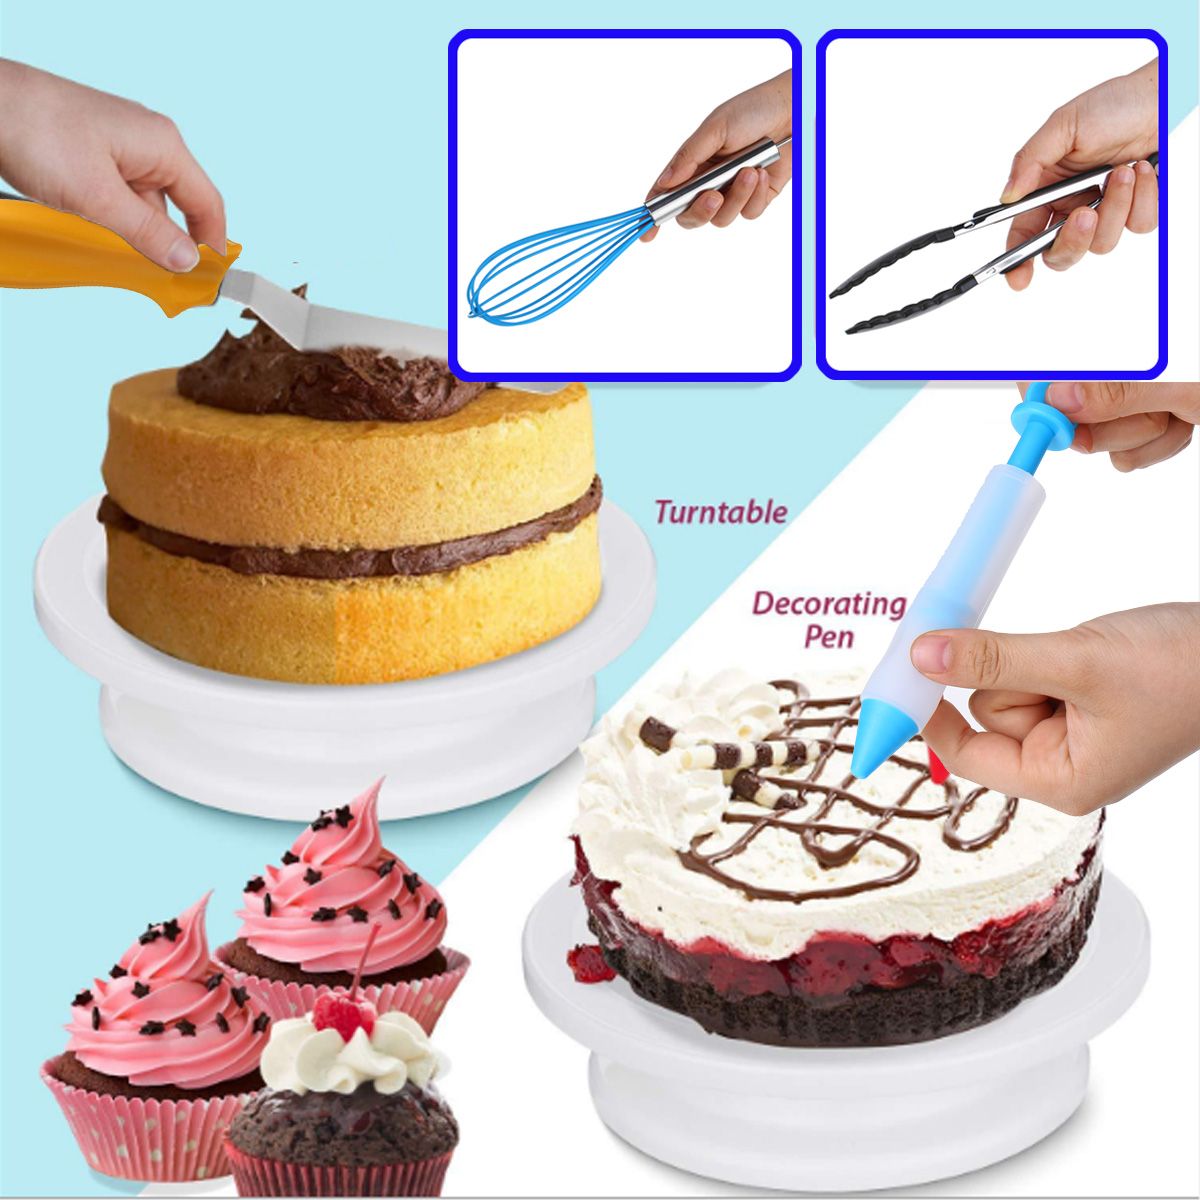 118-PCS-Cake-Decorating-Tools-Set-DIY-Cake-Piping-Tips-Turntable-Rotating-Cake-Stand-Pastry-Nozzle-B-1524305